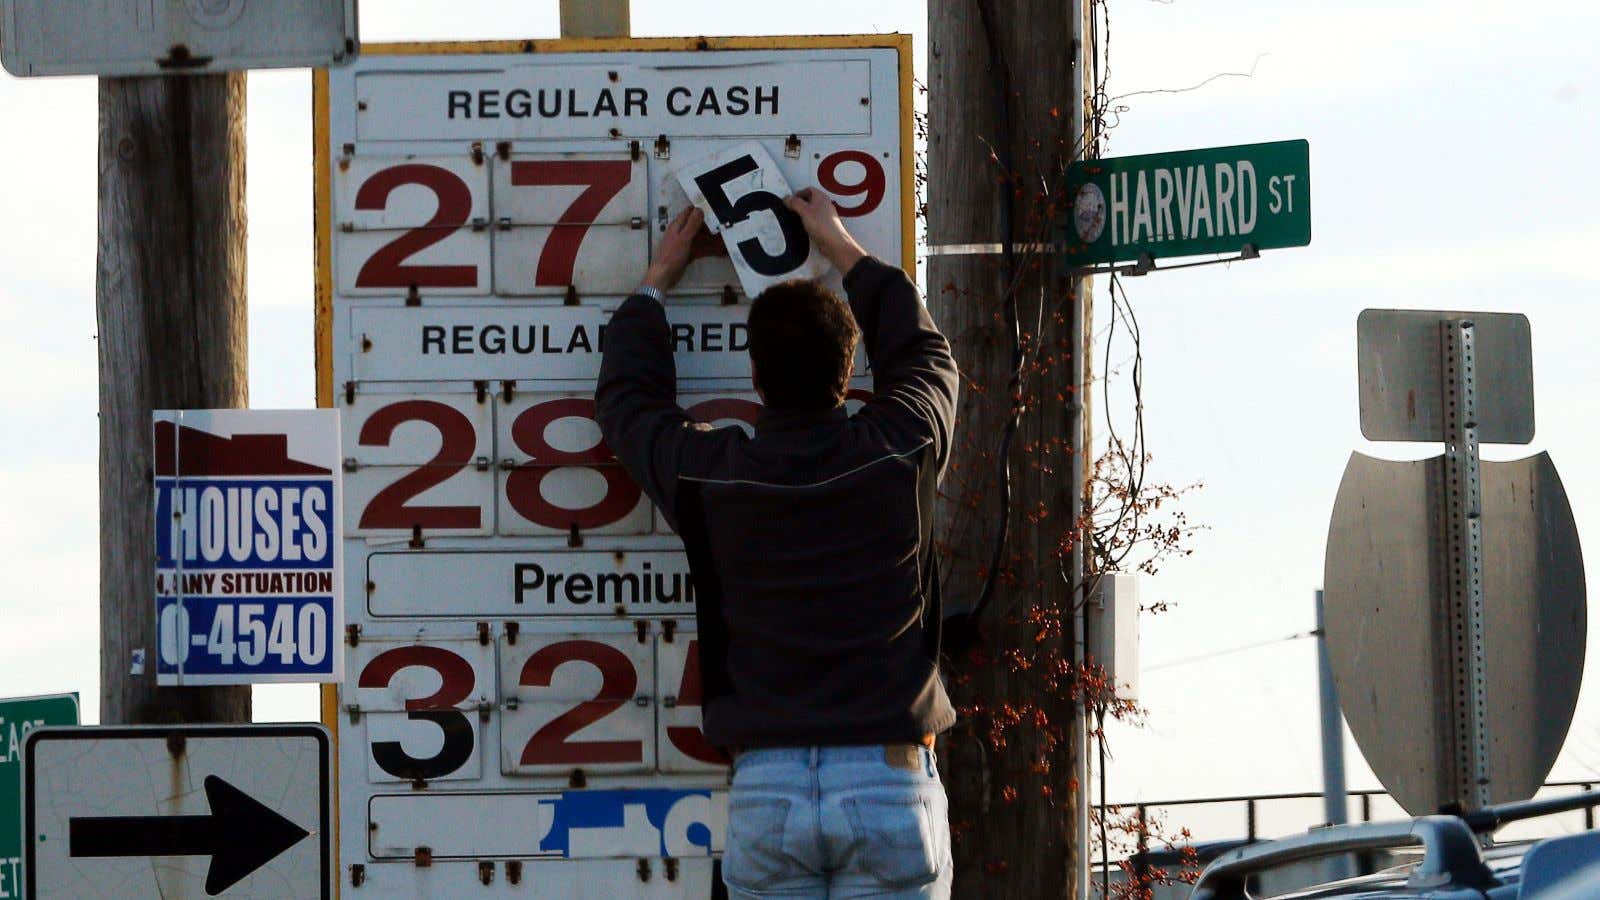 You don’t have to live on Harvard Street to realize falling gas prices are a good thing.